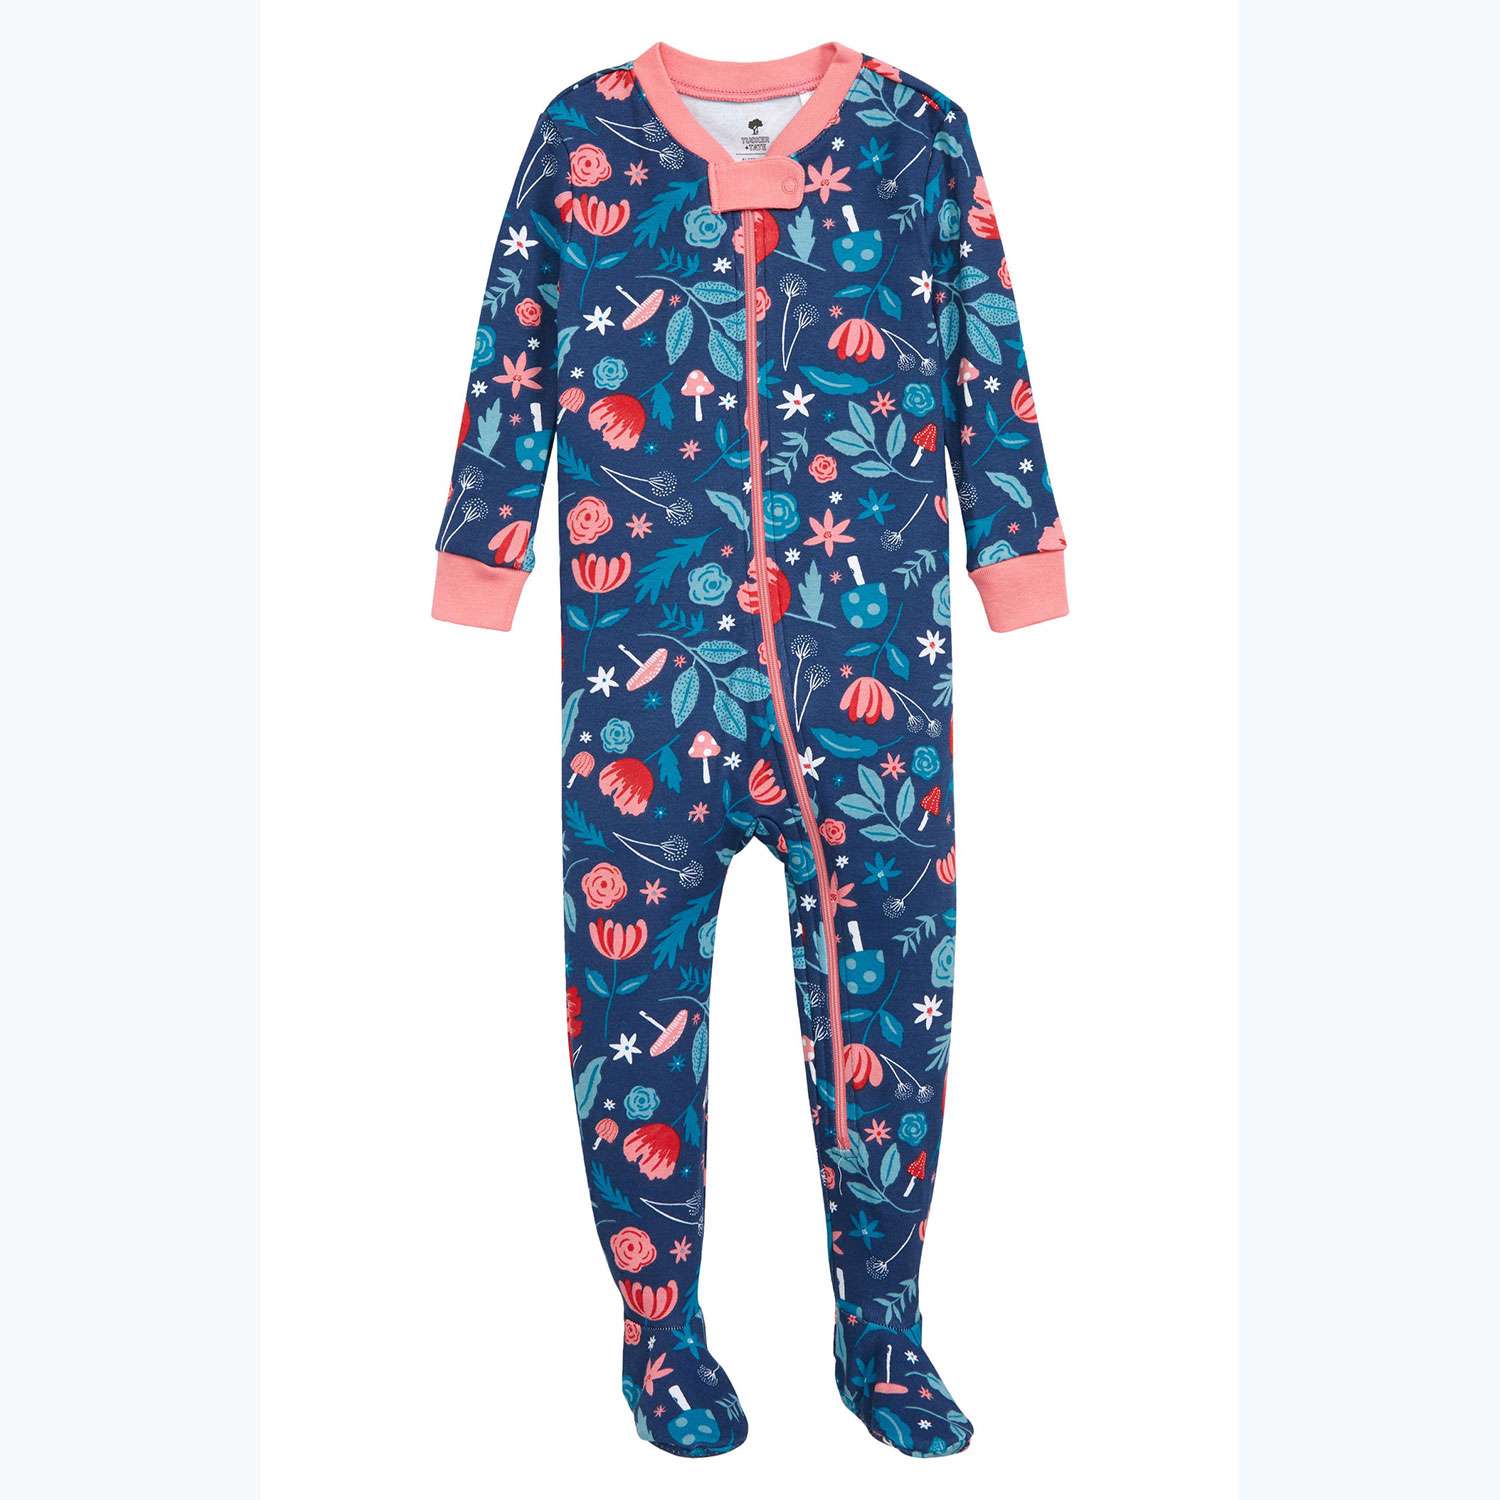 nordstrom tucker tate print fitted one piece pajamas